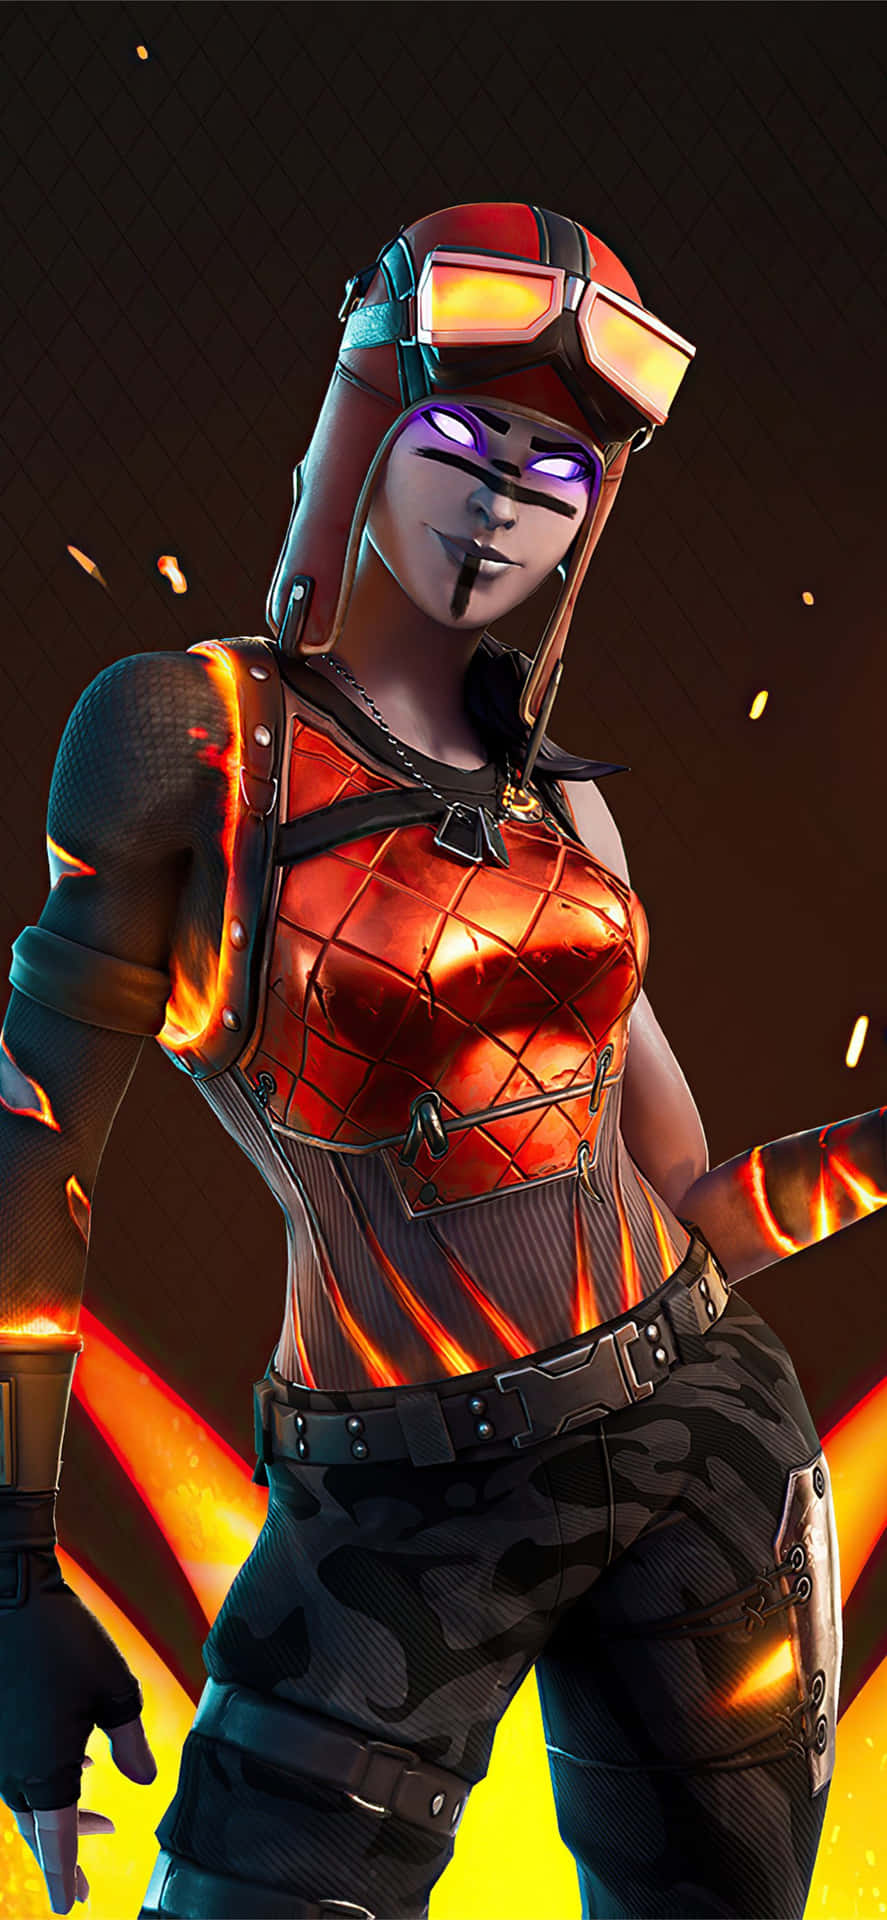 Take your gaming profile to the next level with this unique Fortnite profile picture.